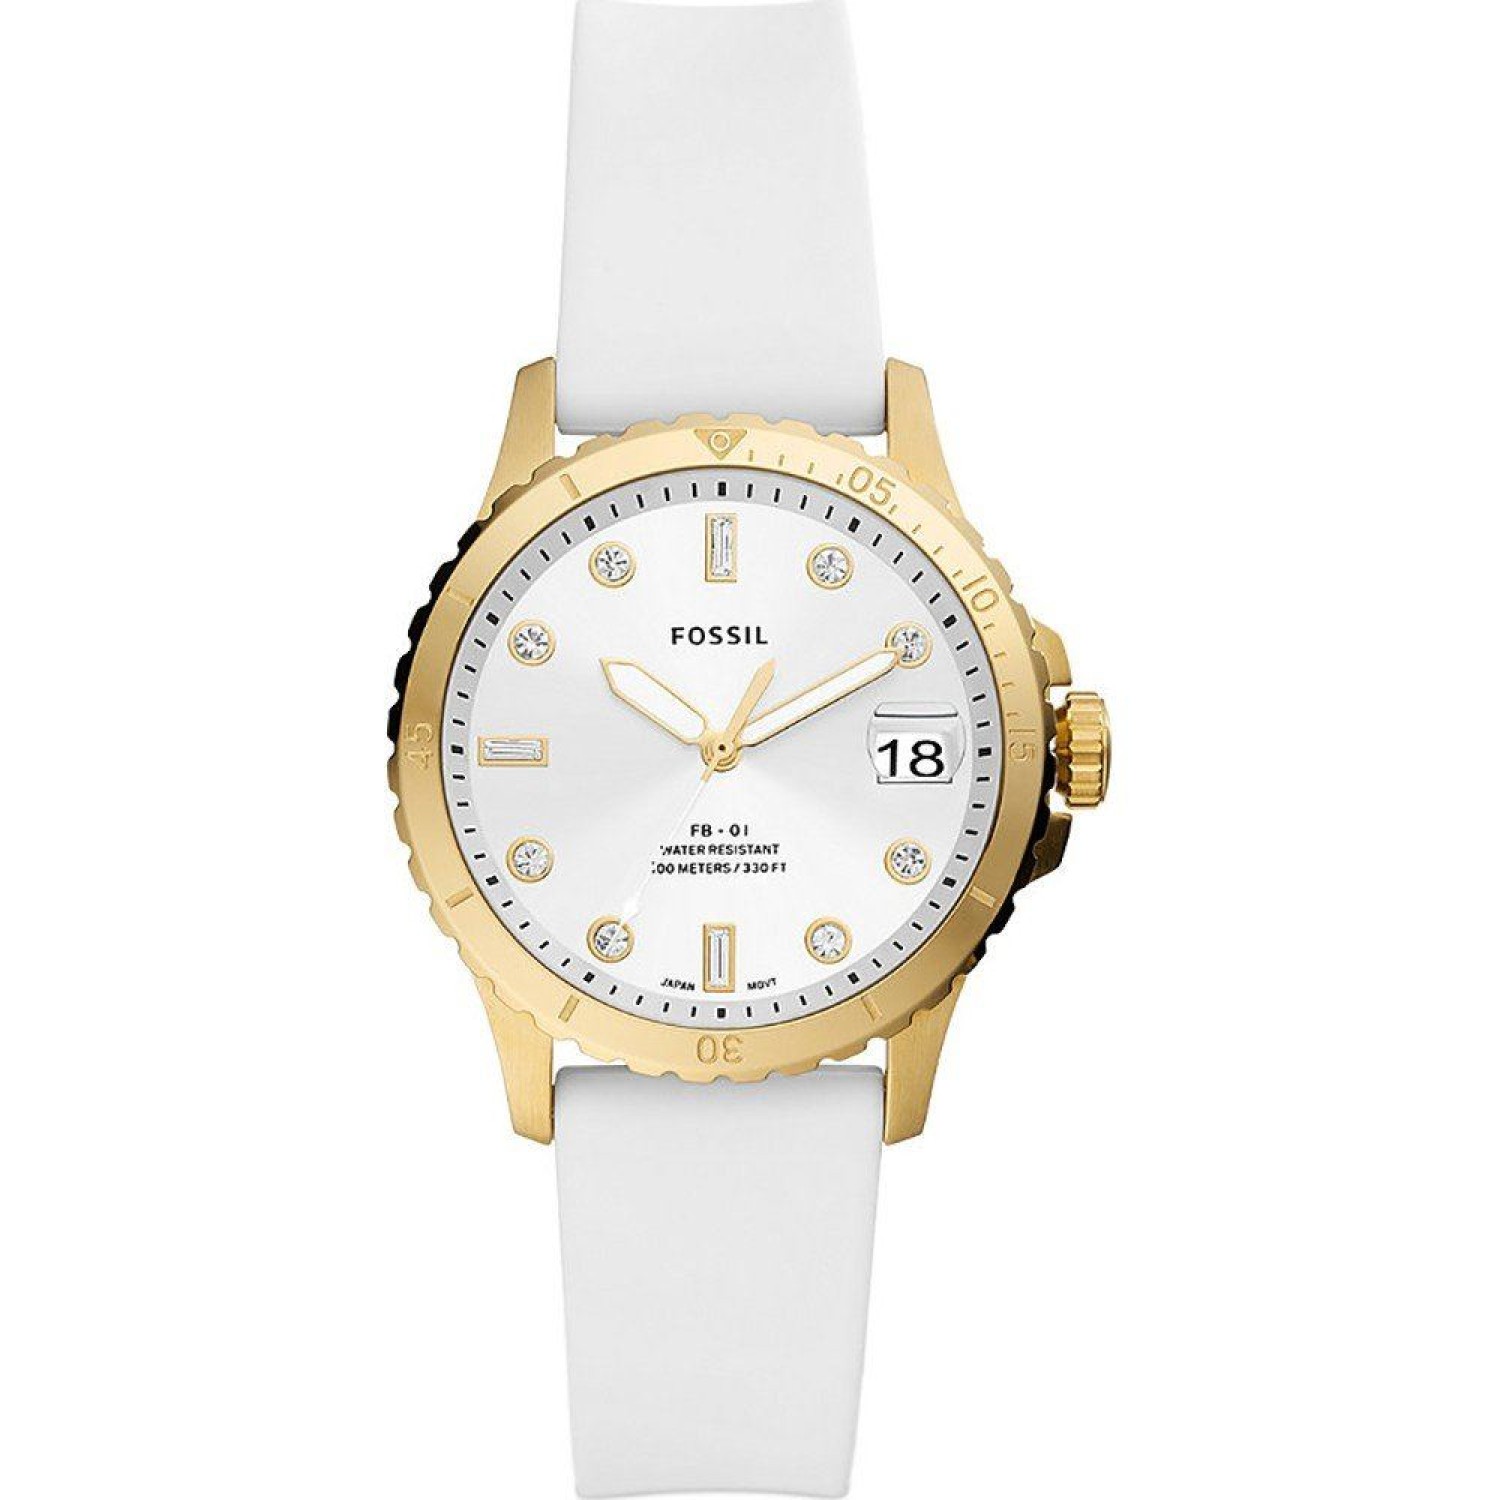 ES5286 Fossil FB-01 Three-Hand Date White Silicone Watch